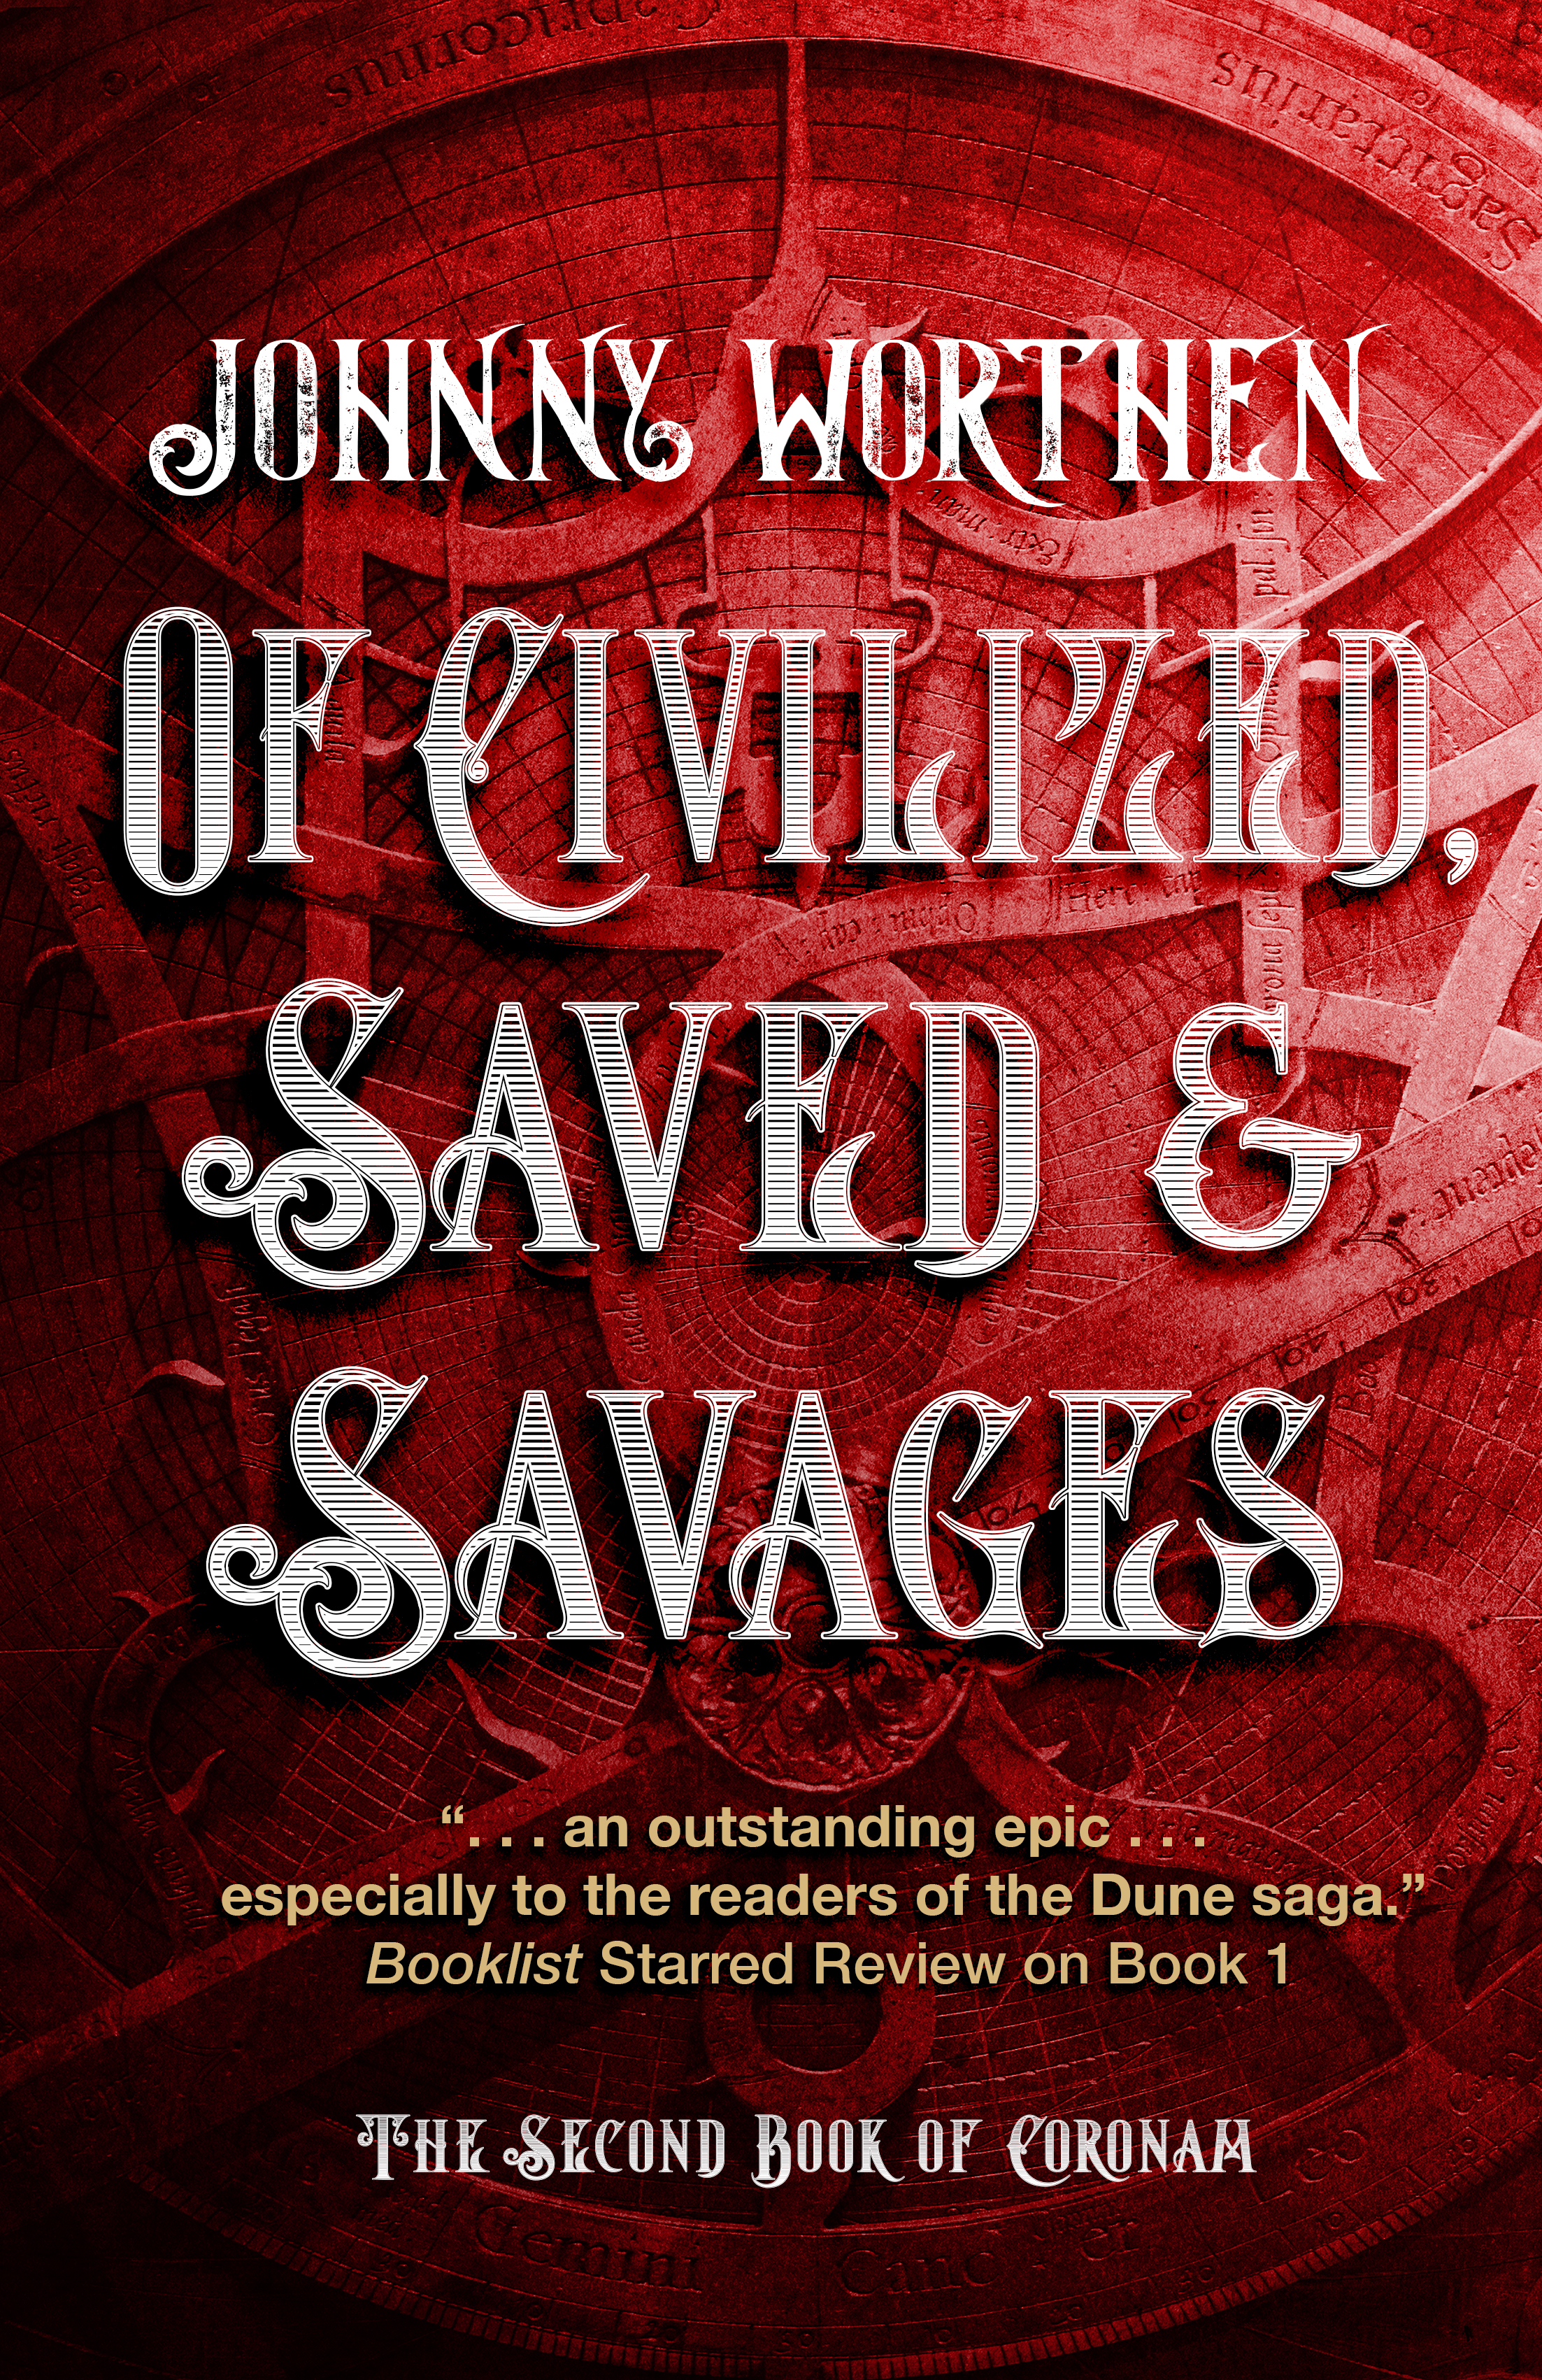 Of Civilized, Saved and Savages?